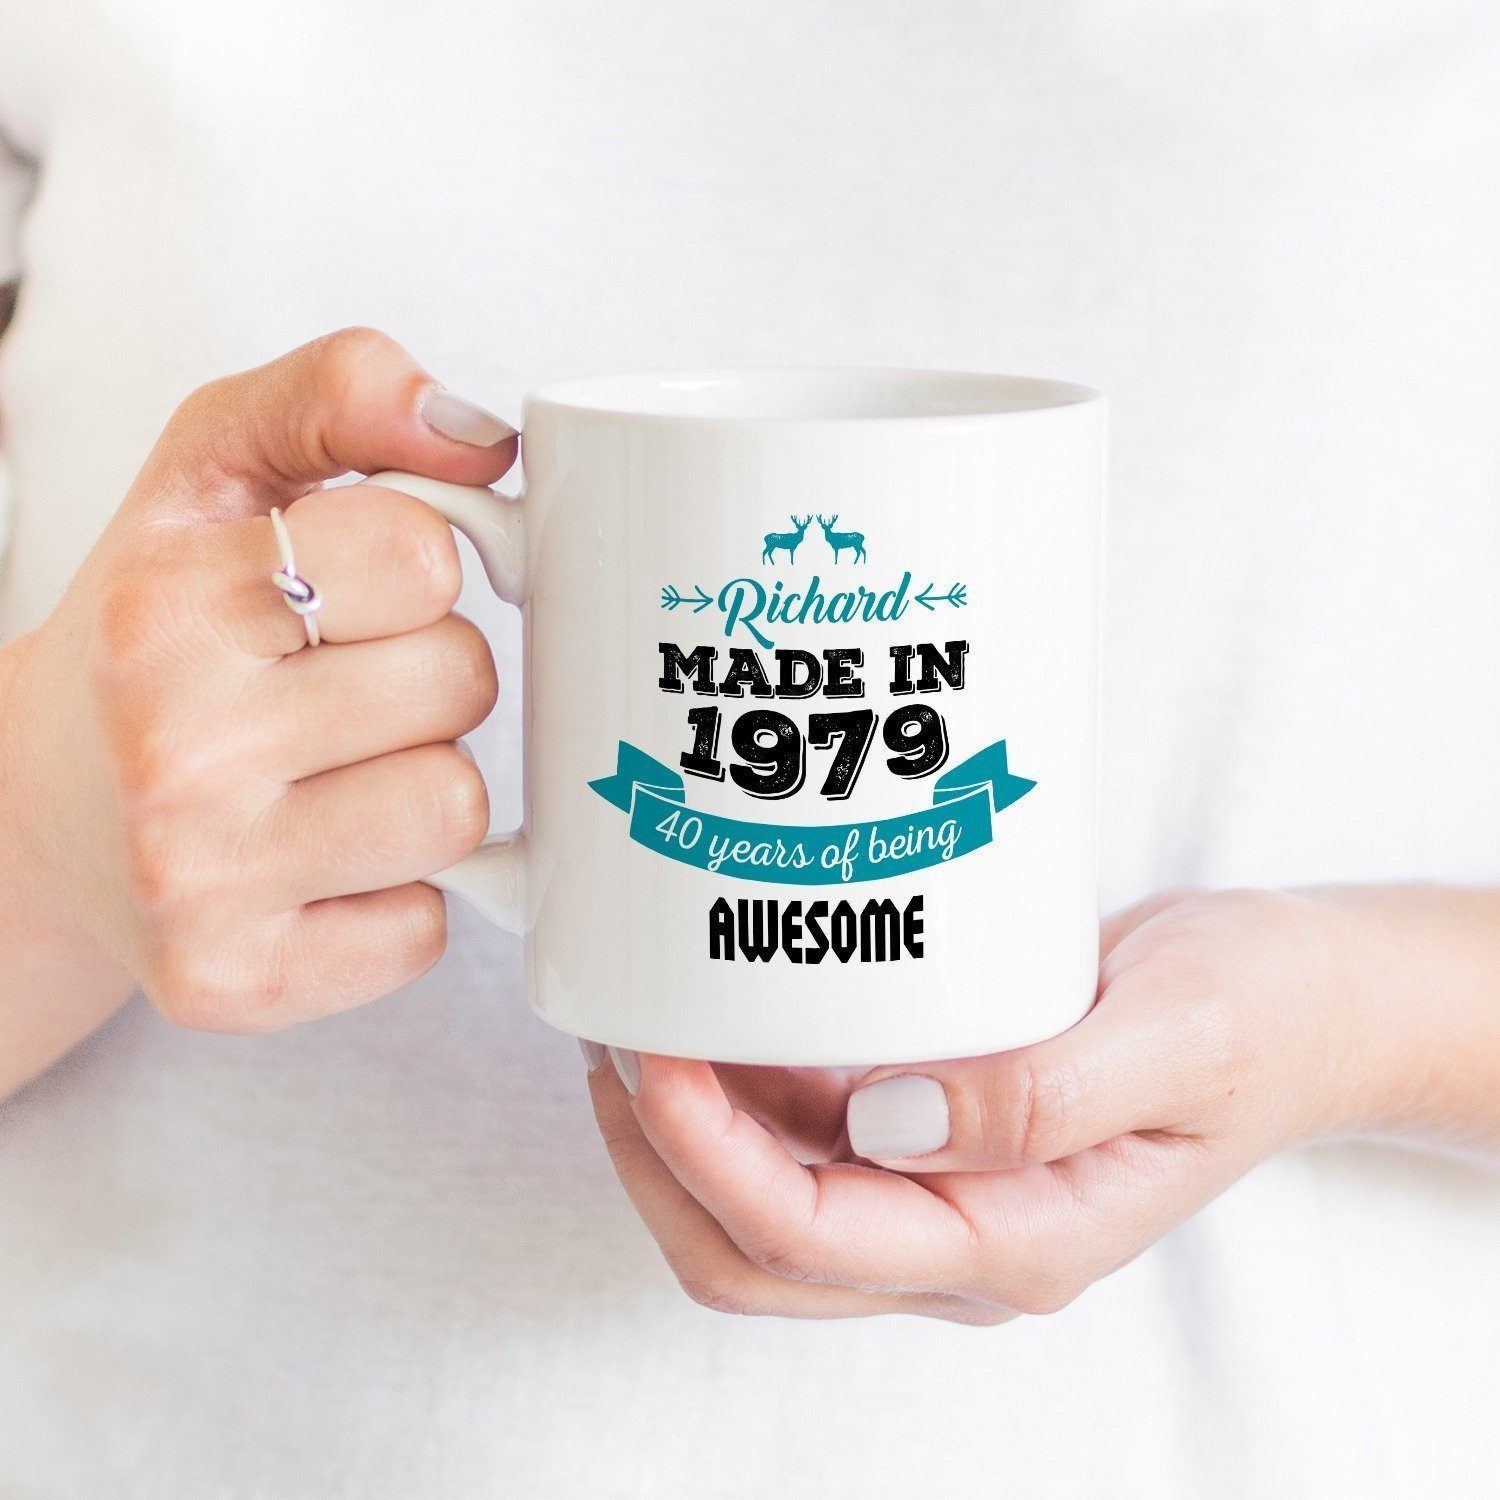 Birthday Gift For Him , Personalized Mug With A Name, Made In 1979, 1989, 1969, 1959, Husband Birthday Gift